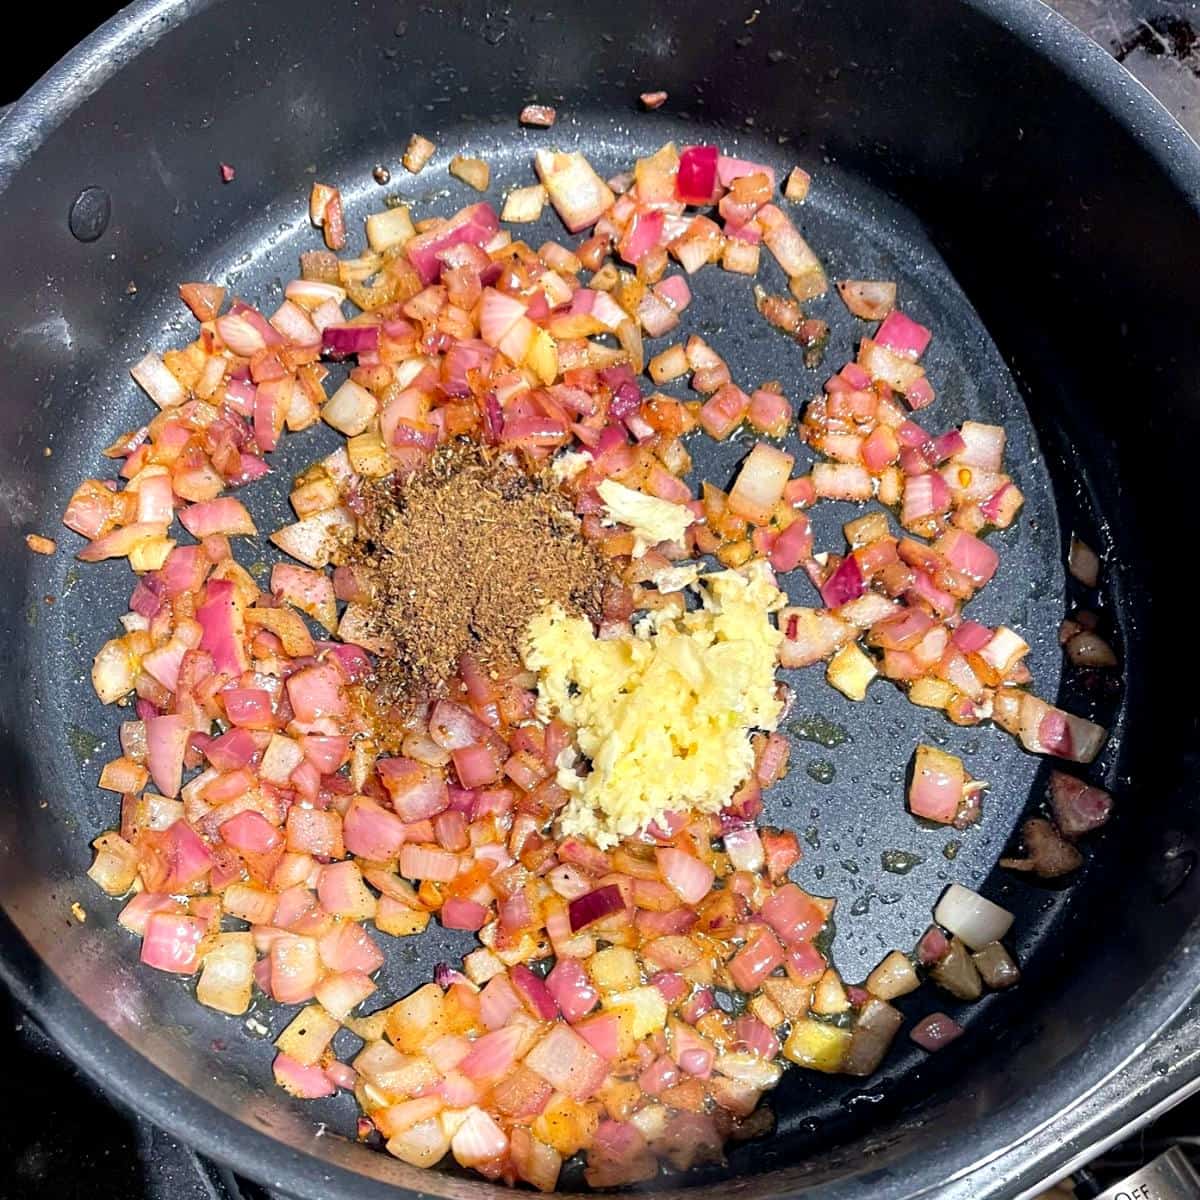 Spices and garlic added to onions for khoresh bademjoon.